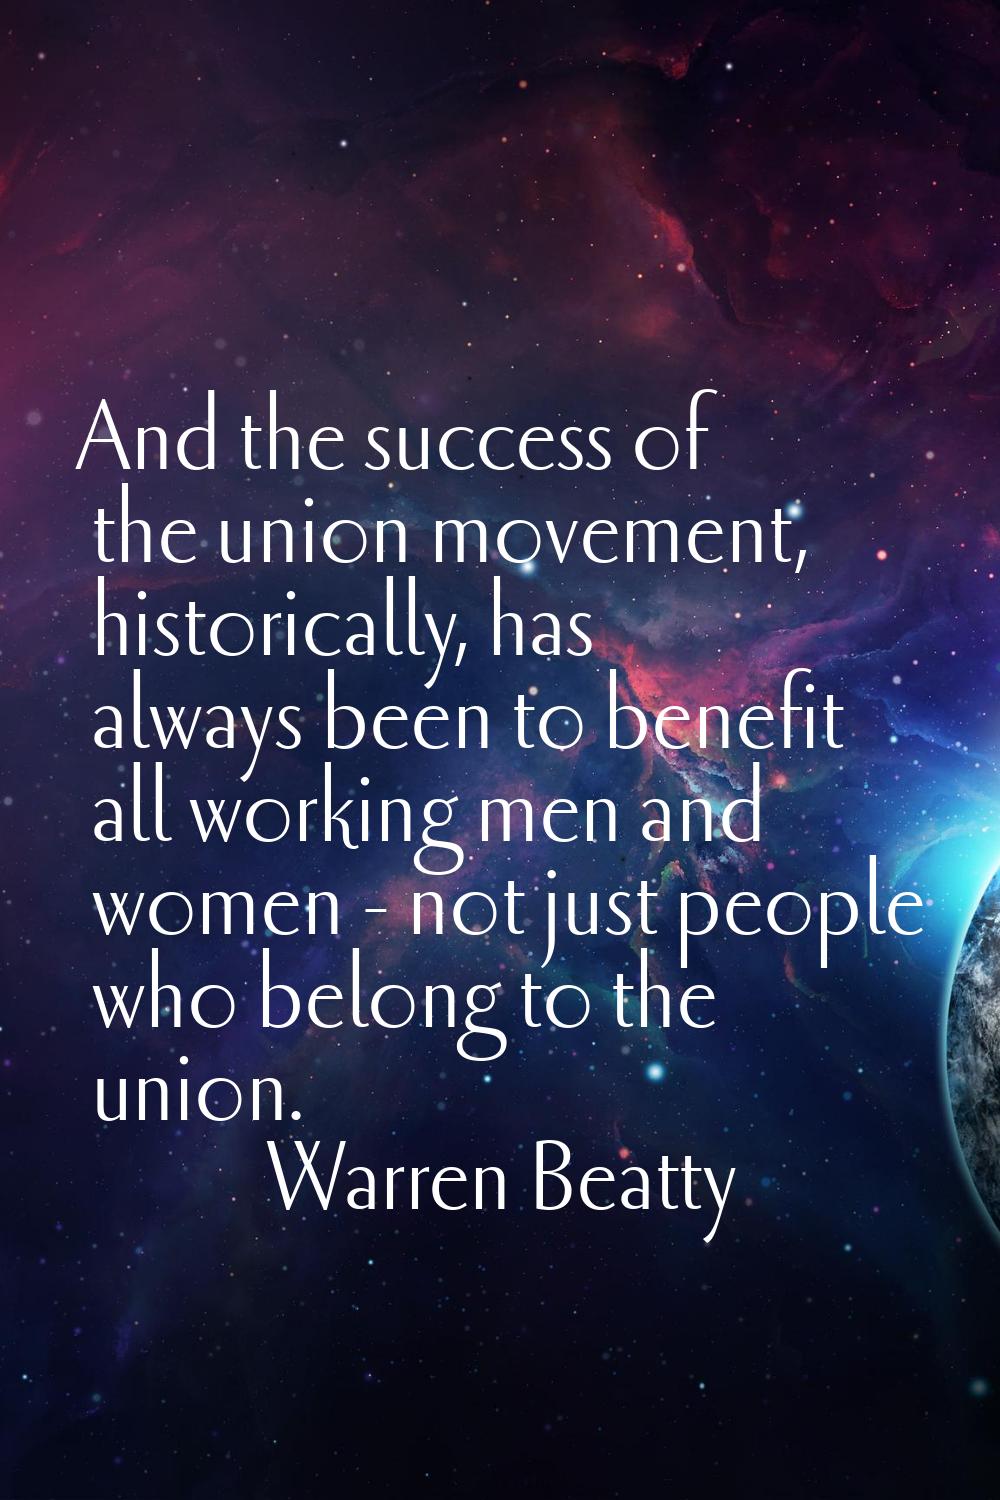 And the success of the union movement, historically, has always been to benefit all working men and